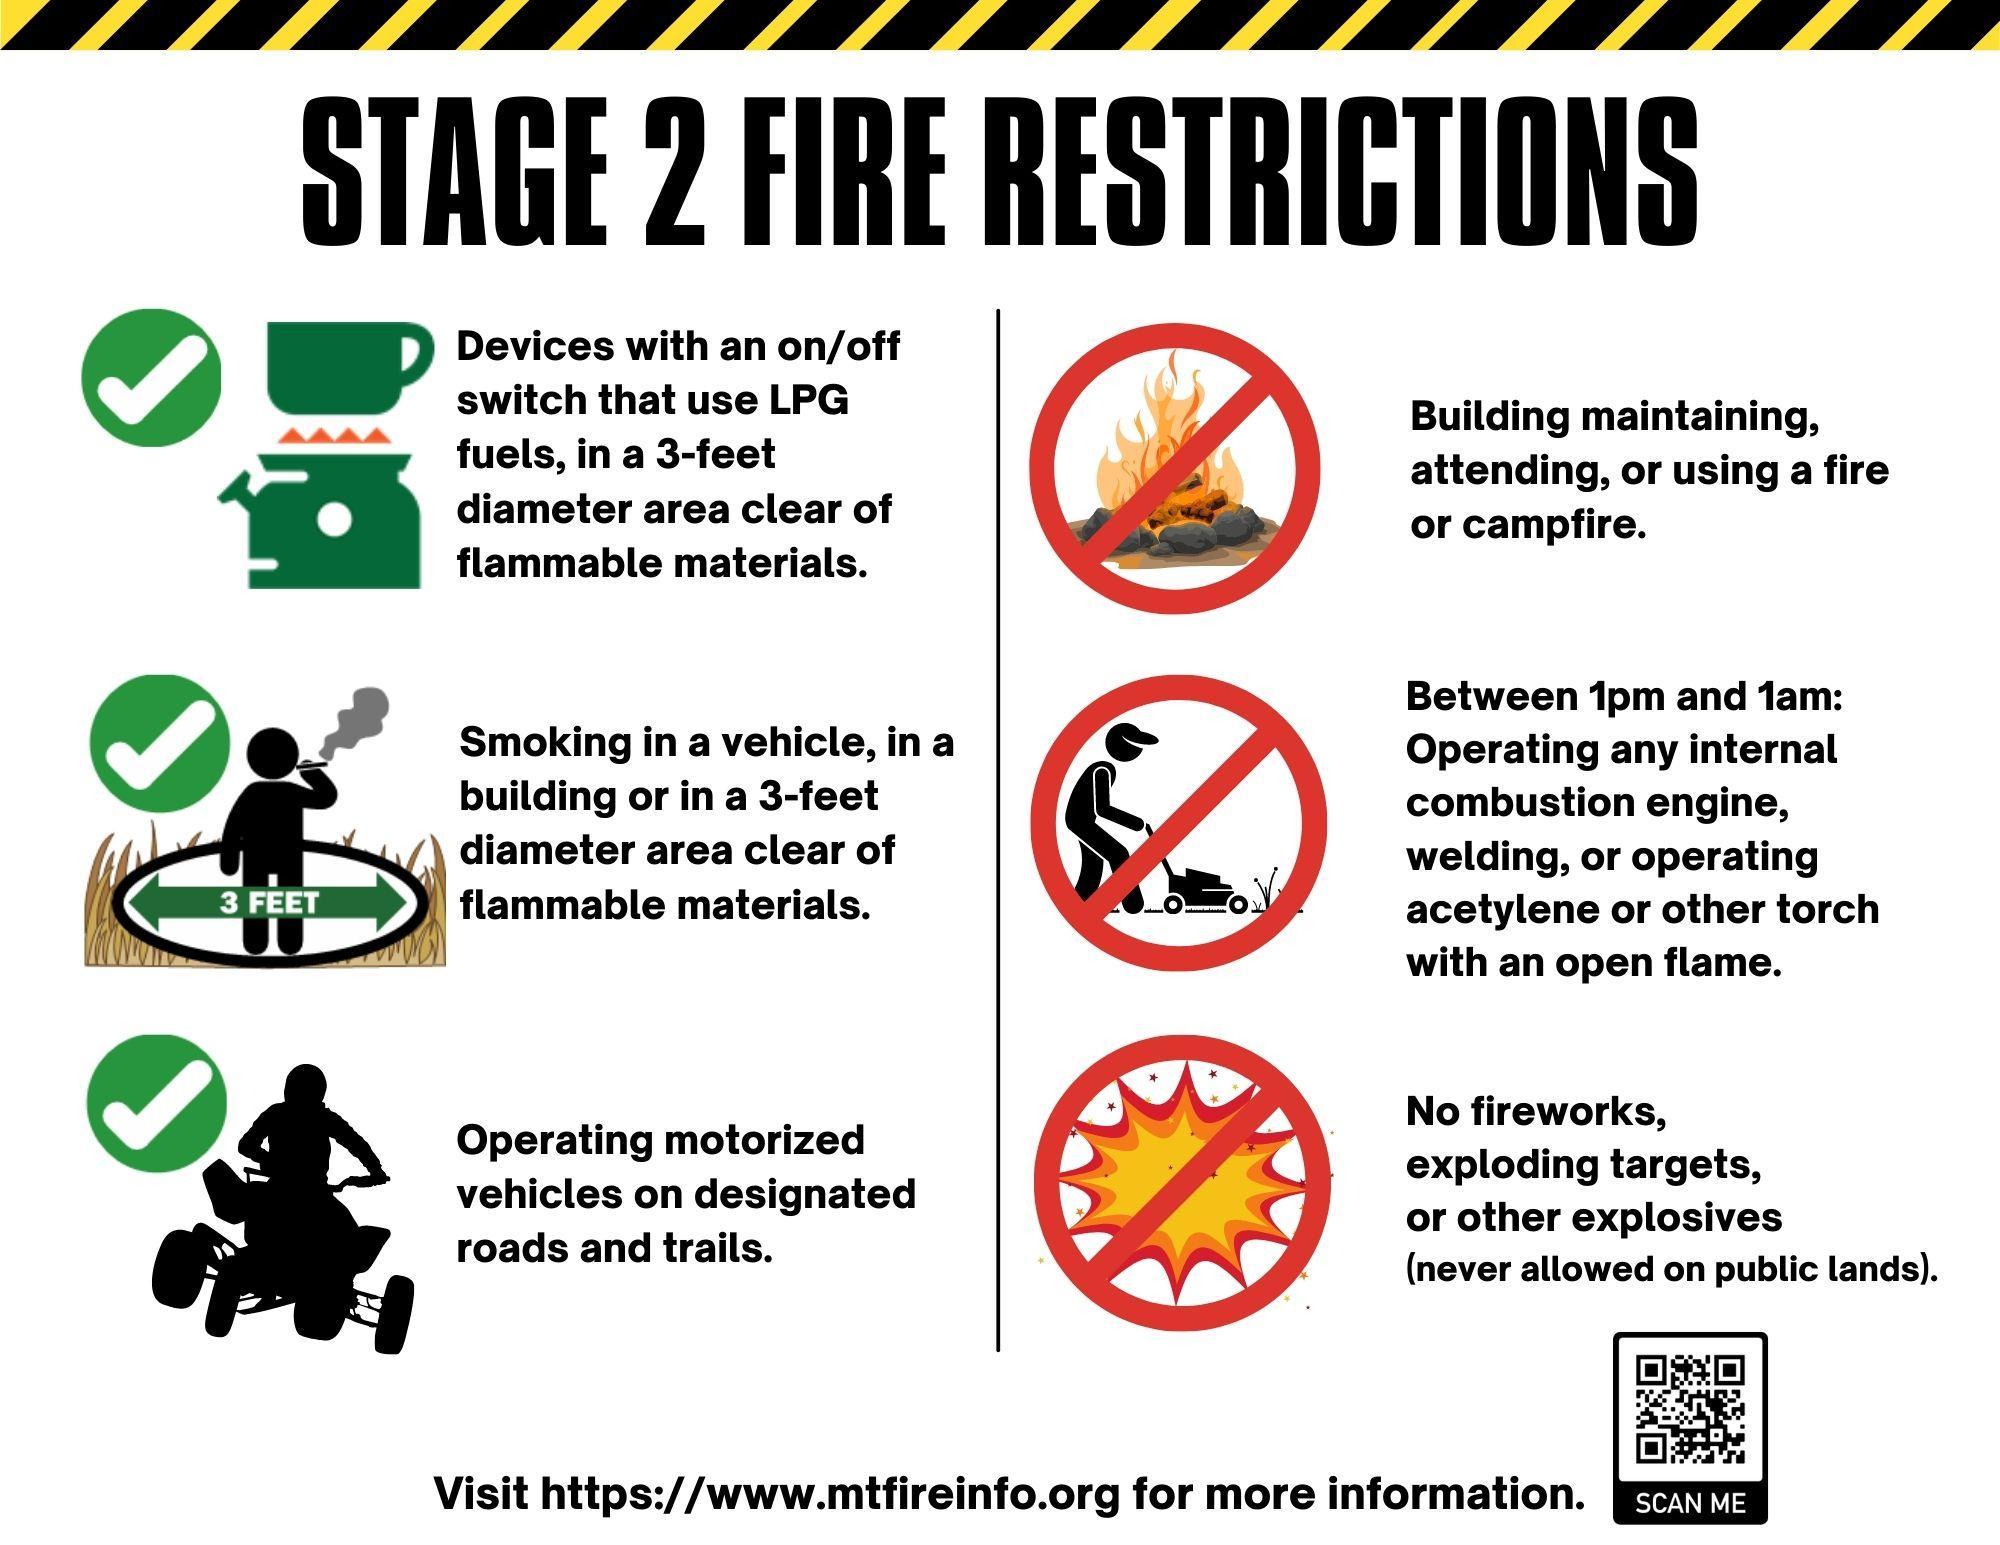 Stage 2 Fire Restrictions are in place in the Bitterroot National Forest, as of August 12, 2022